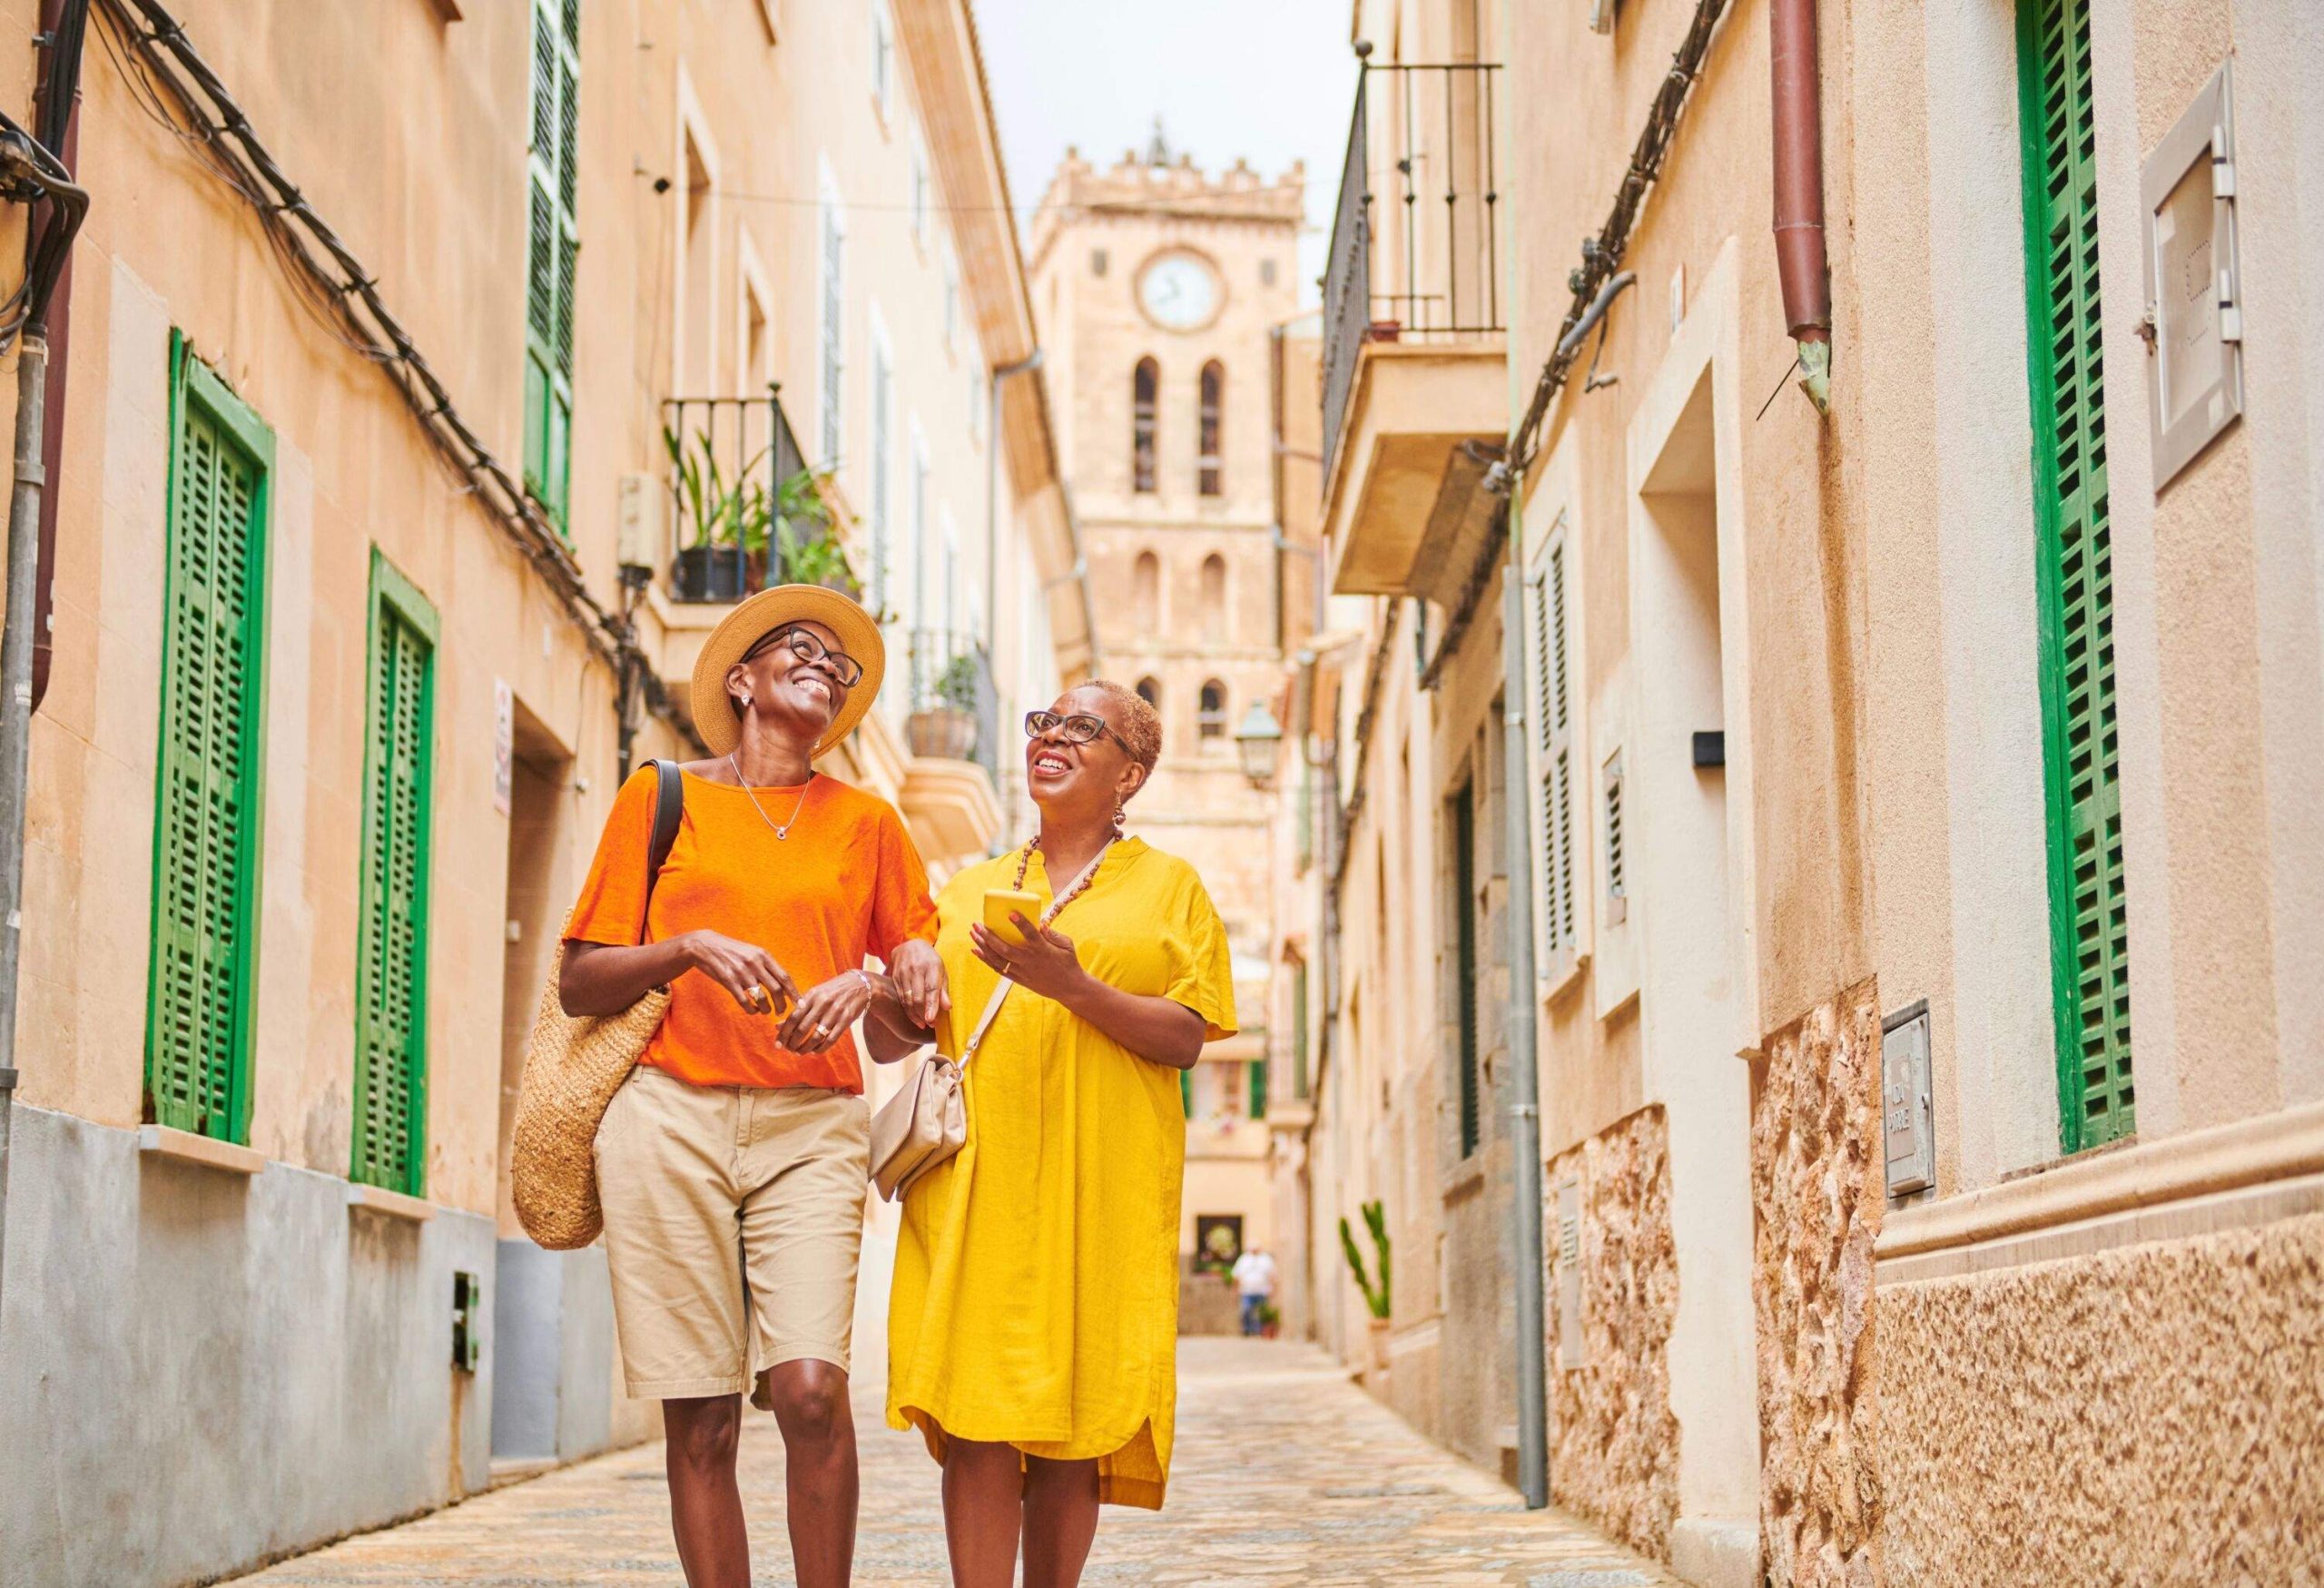 Using a mobile app on their smart phone to guide their way around a traditional old town in Majorca Spain.